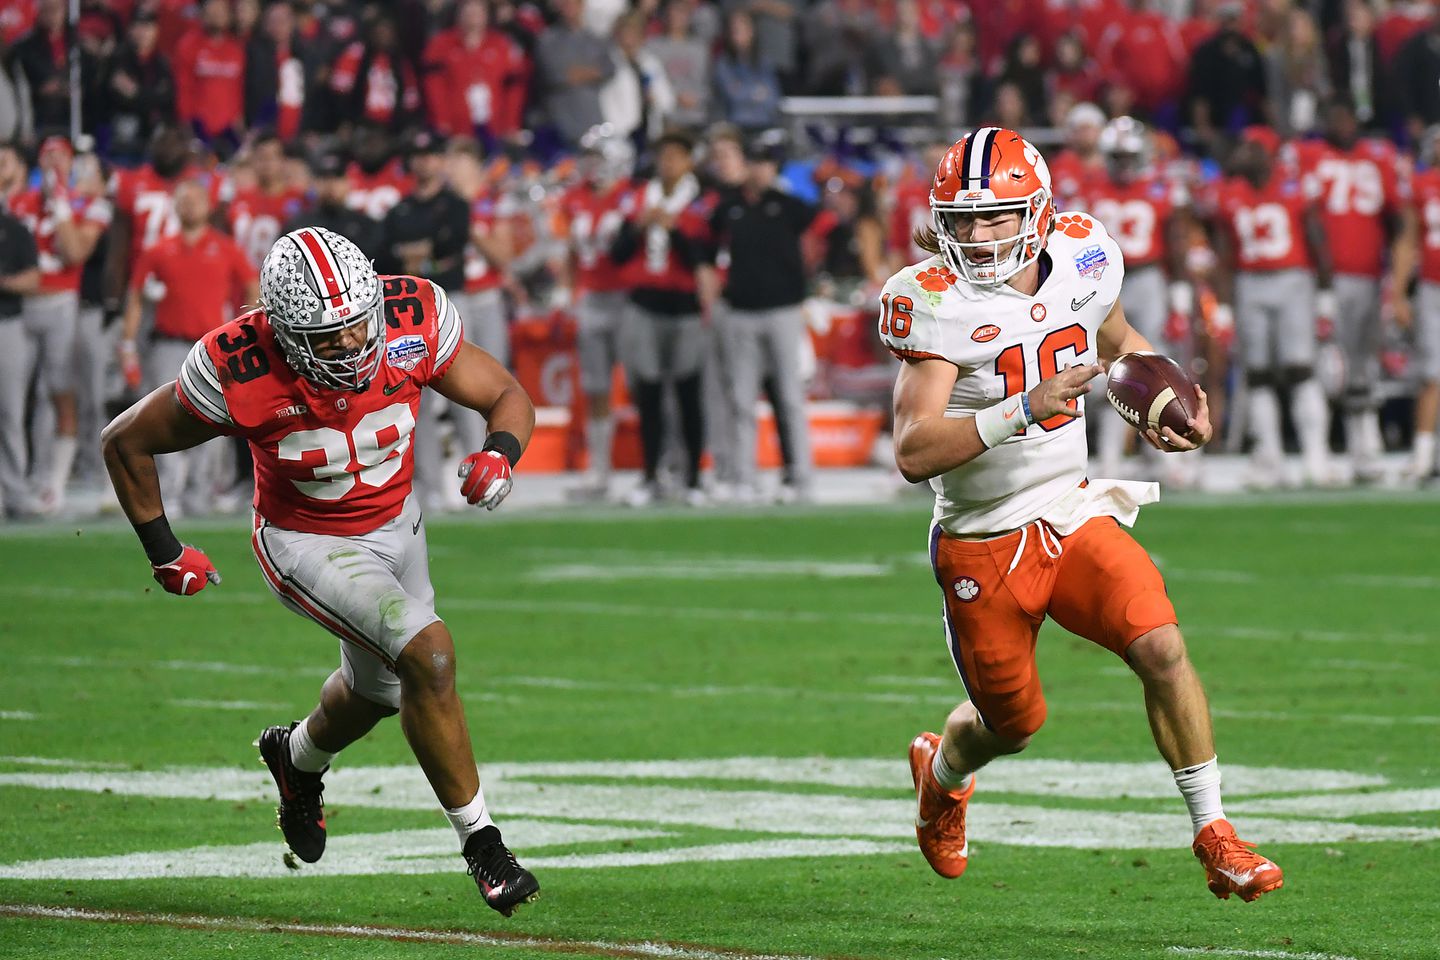 Clemson Beats Ohio State to Advance to Title Game